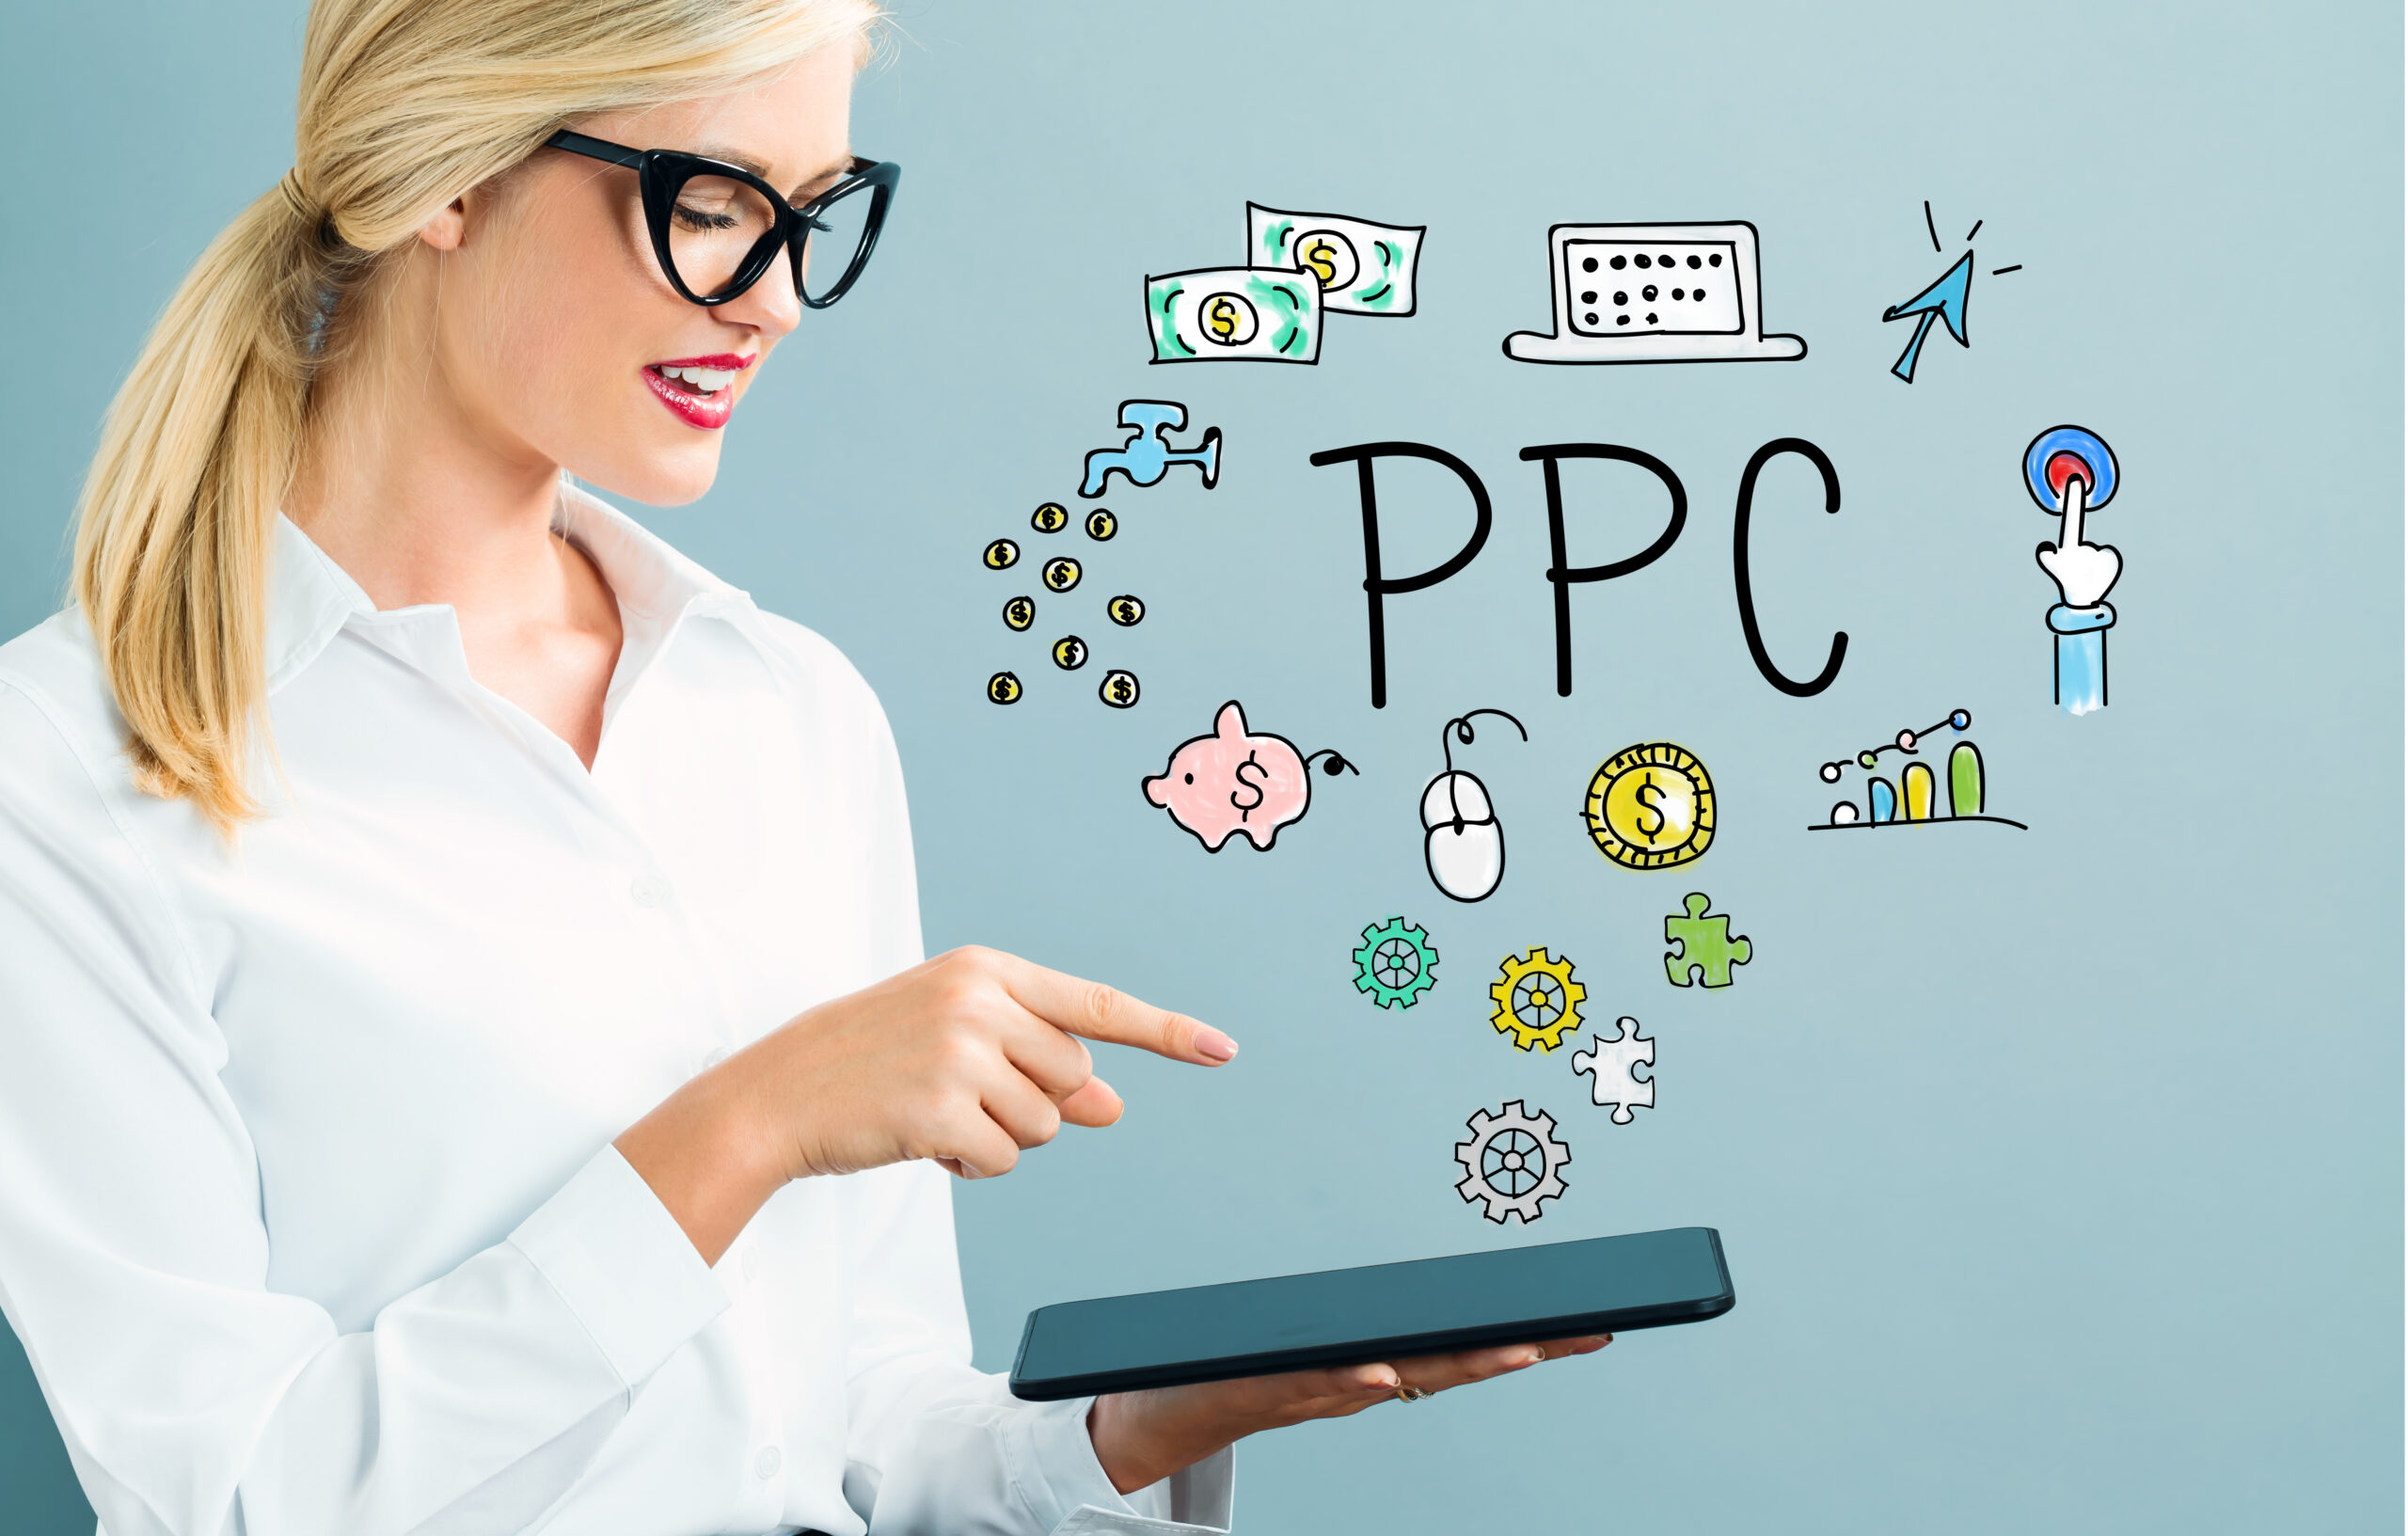 graphicstock-ppc-text-with-business-woman-using-a-tablet_rwenB3iNOW-scaled.jpg